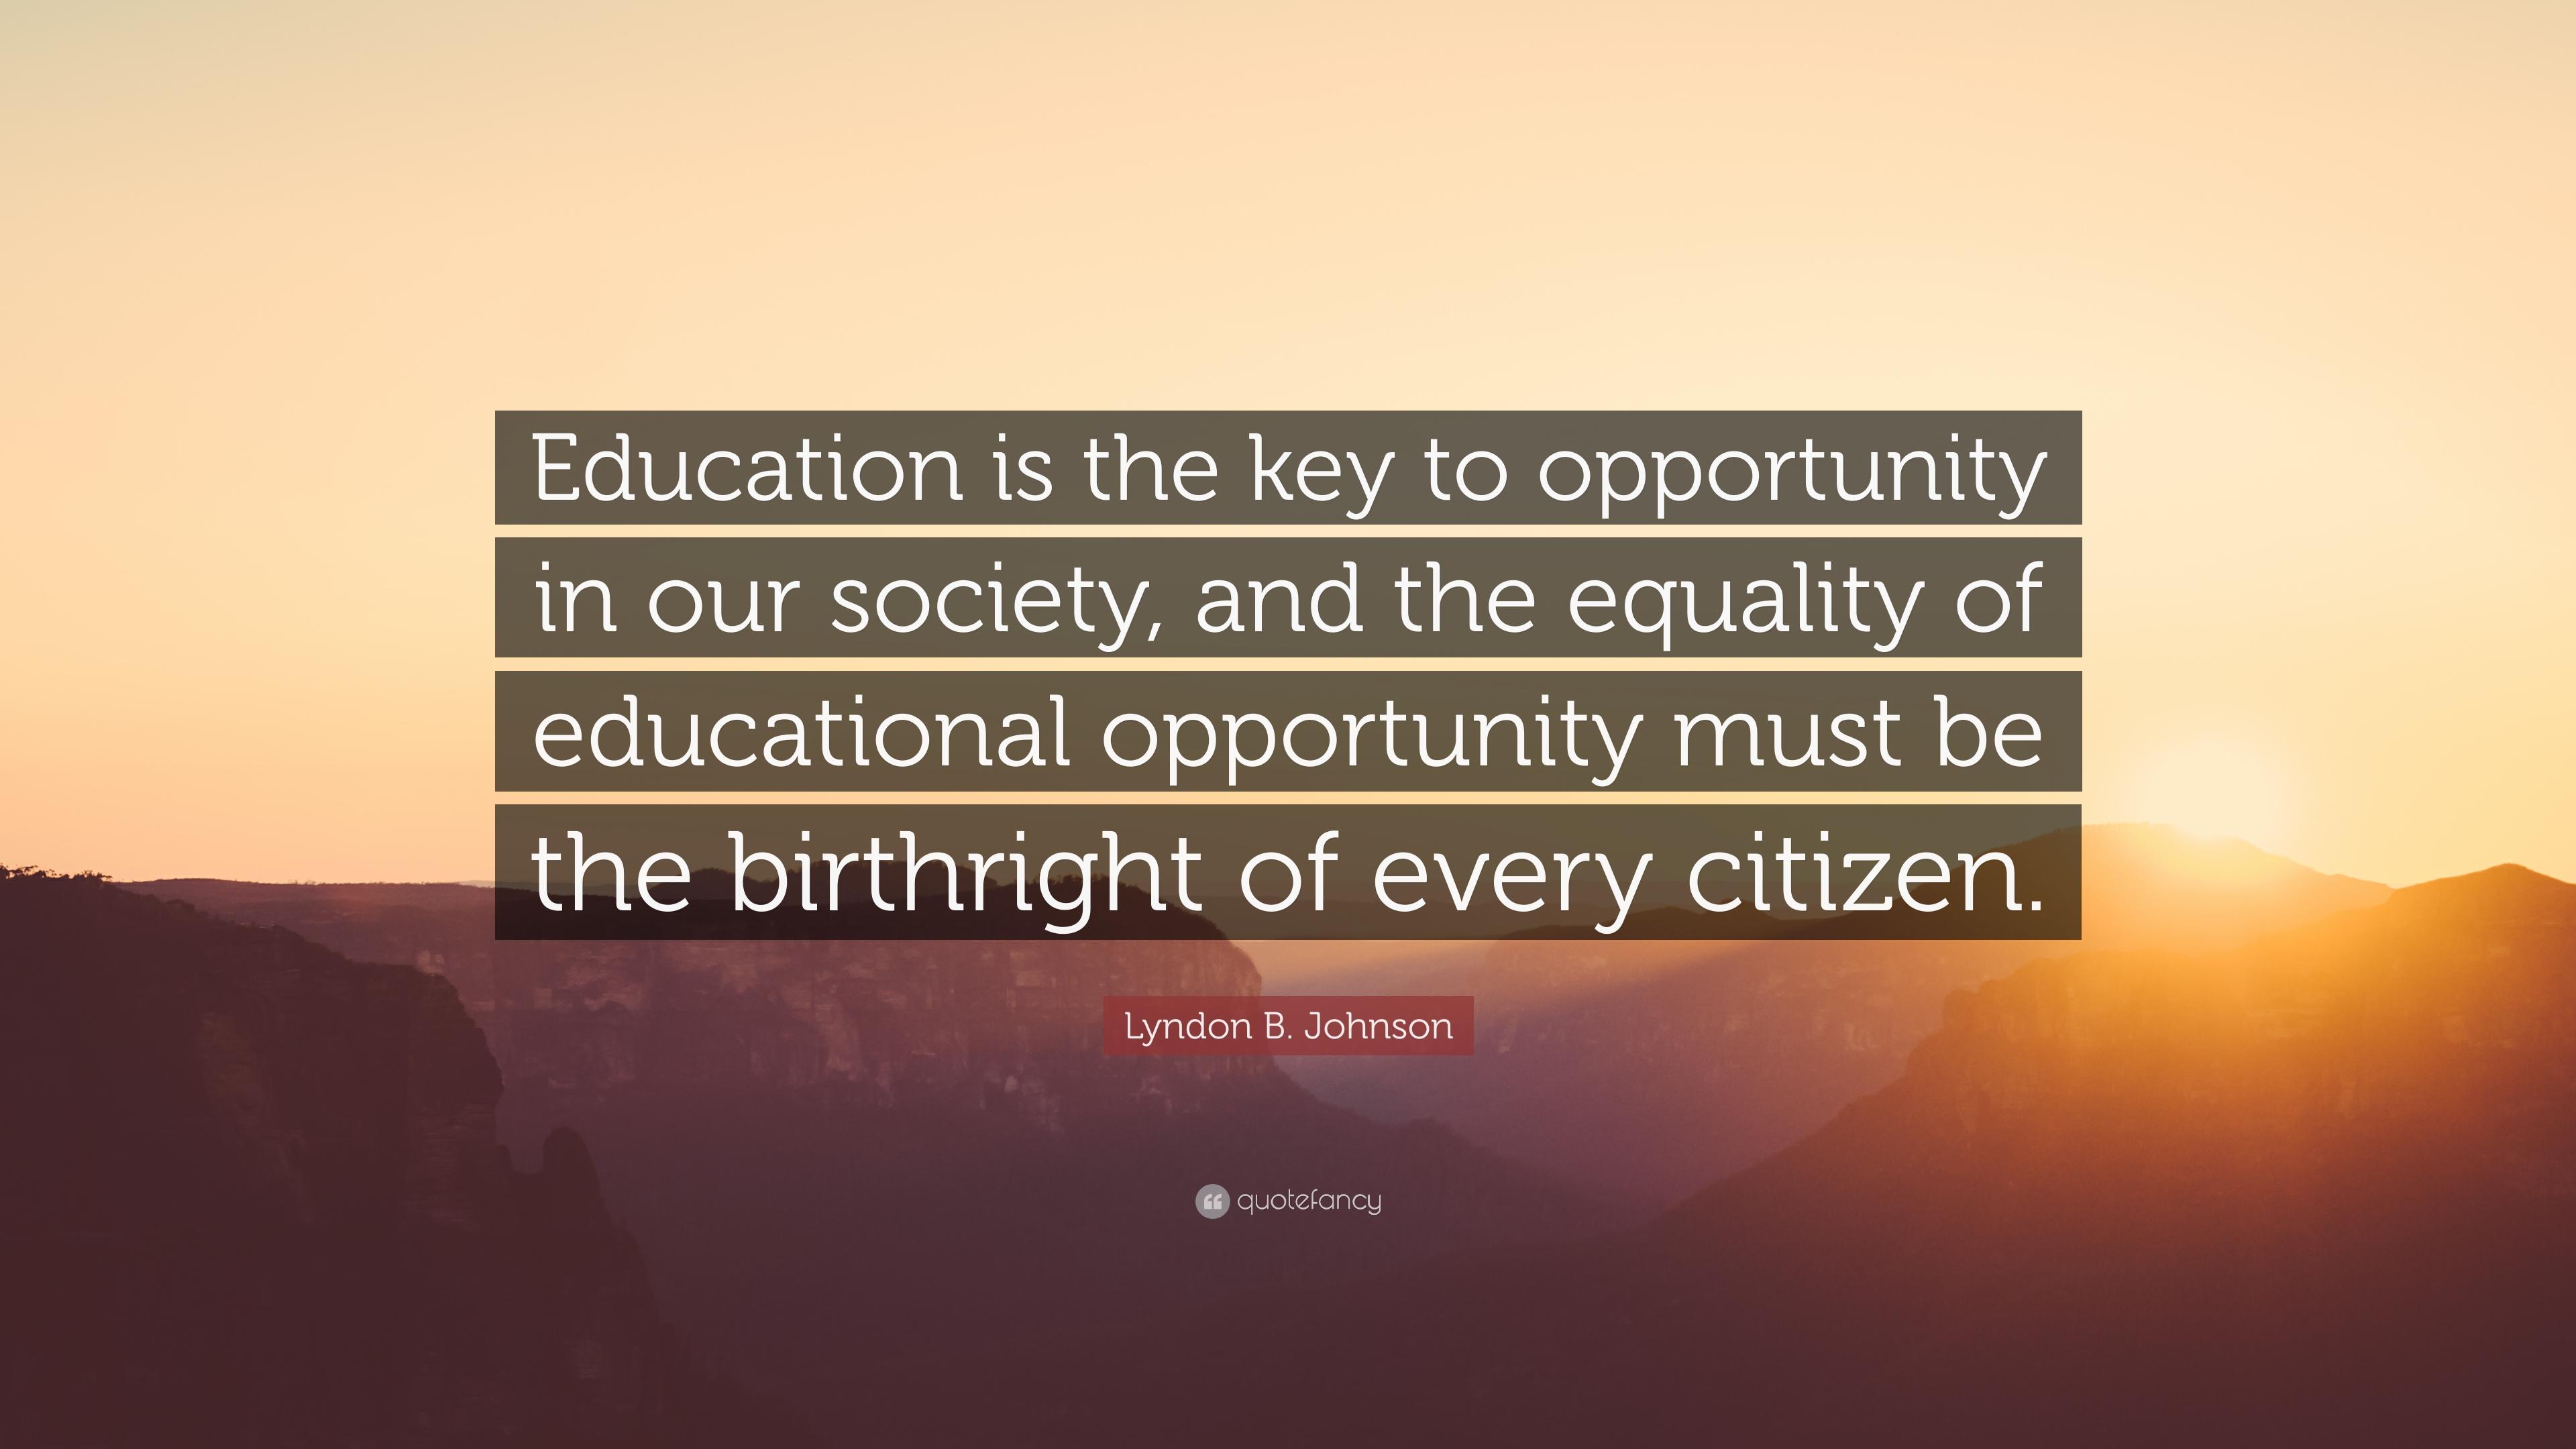 Lyndon B. Johnson Quote: “Education is the key to opportunity in our